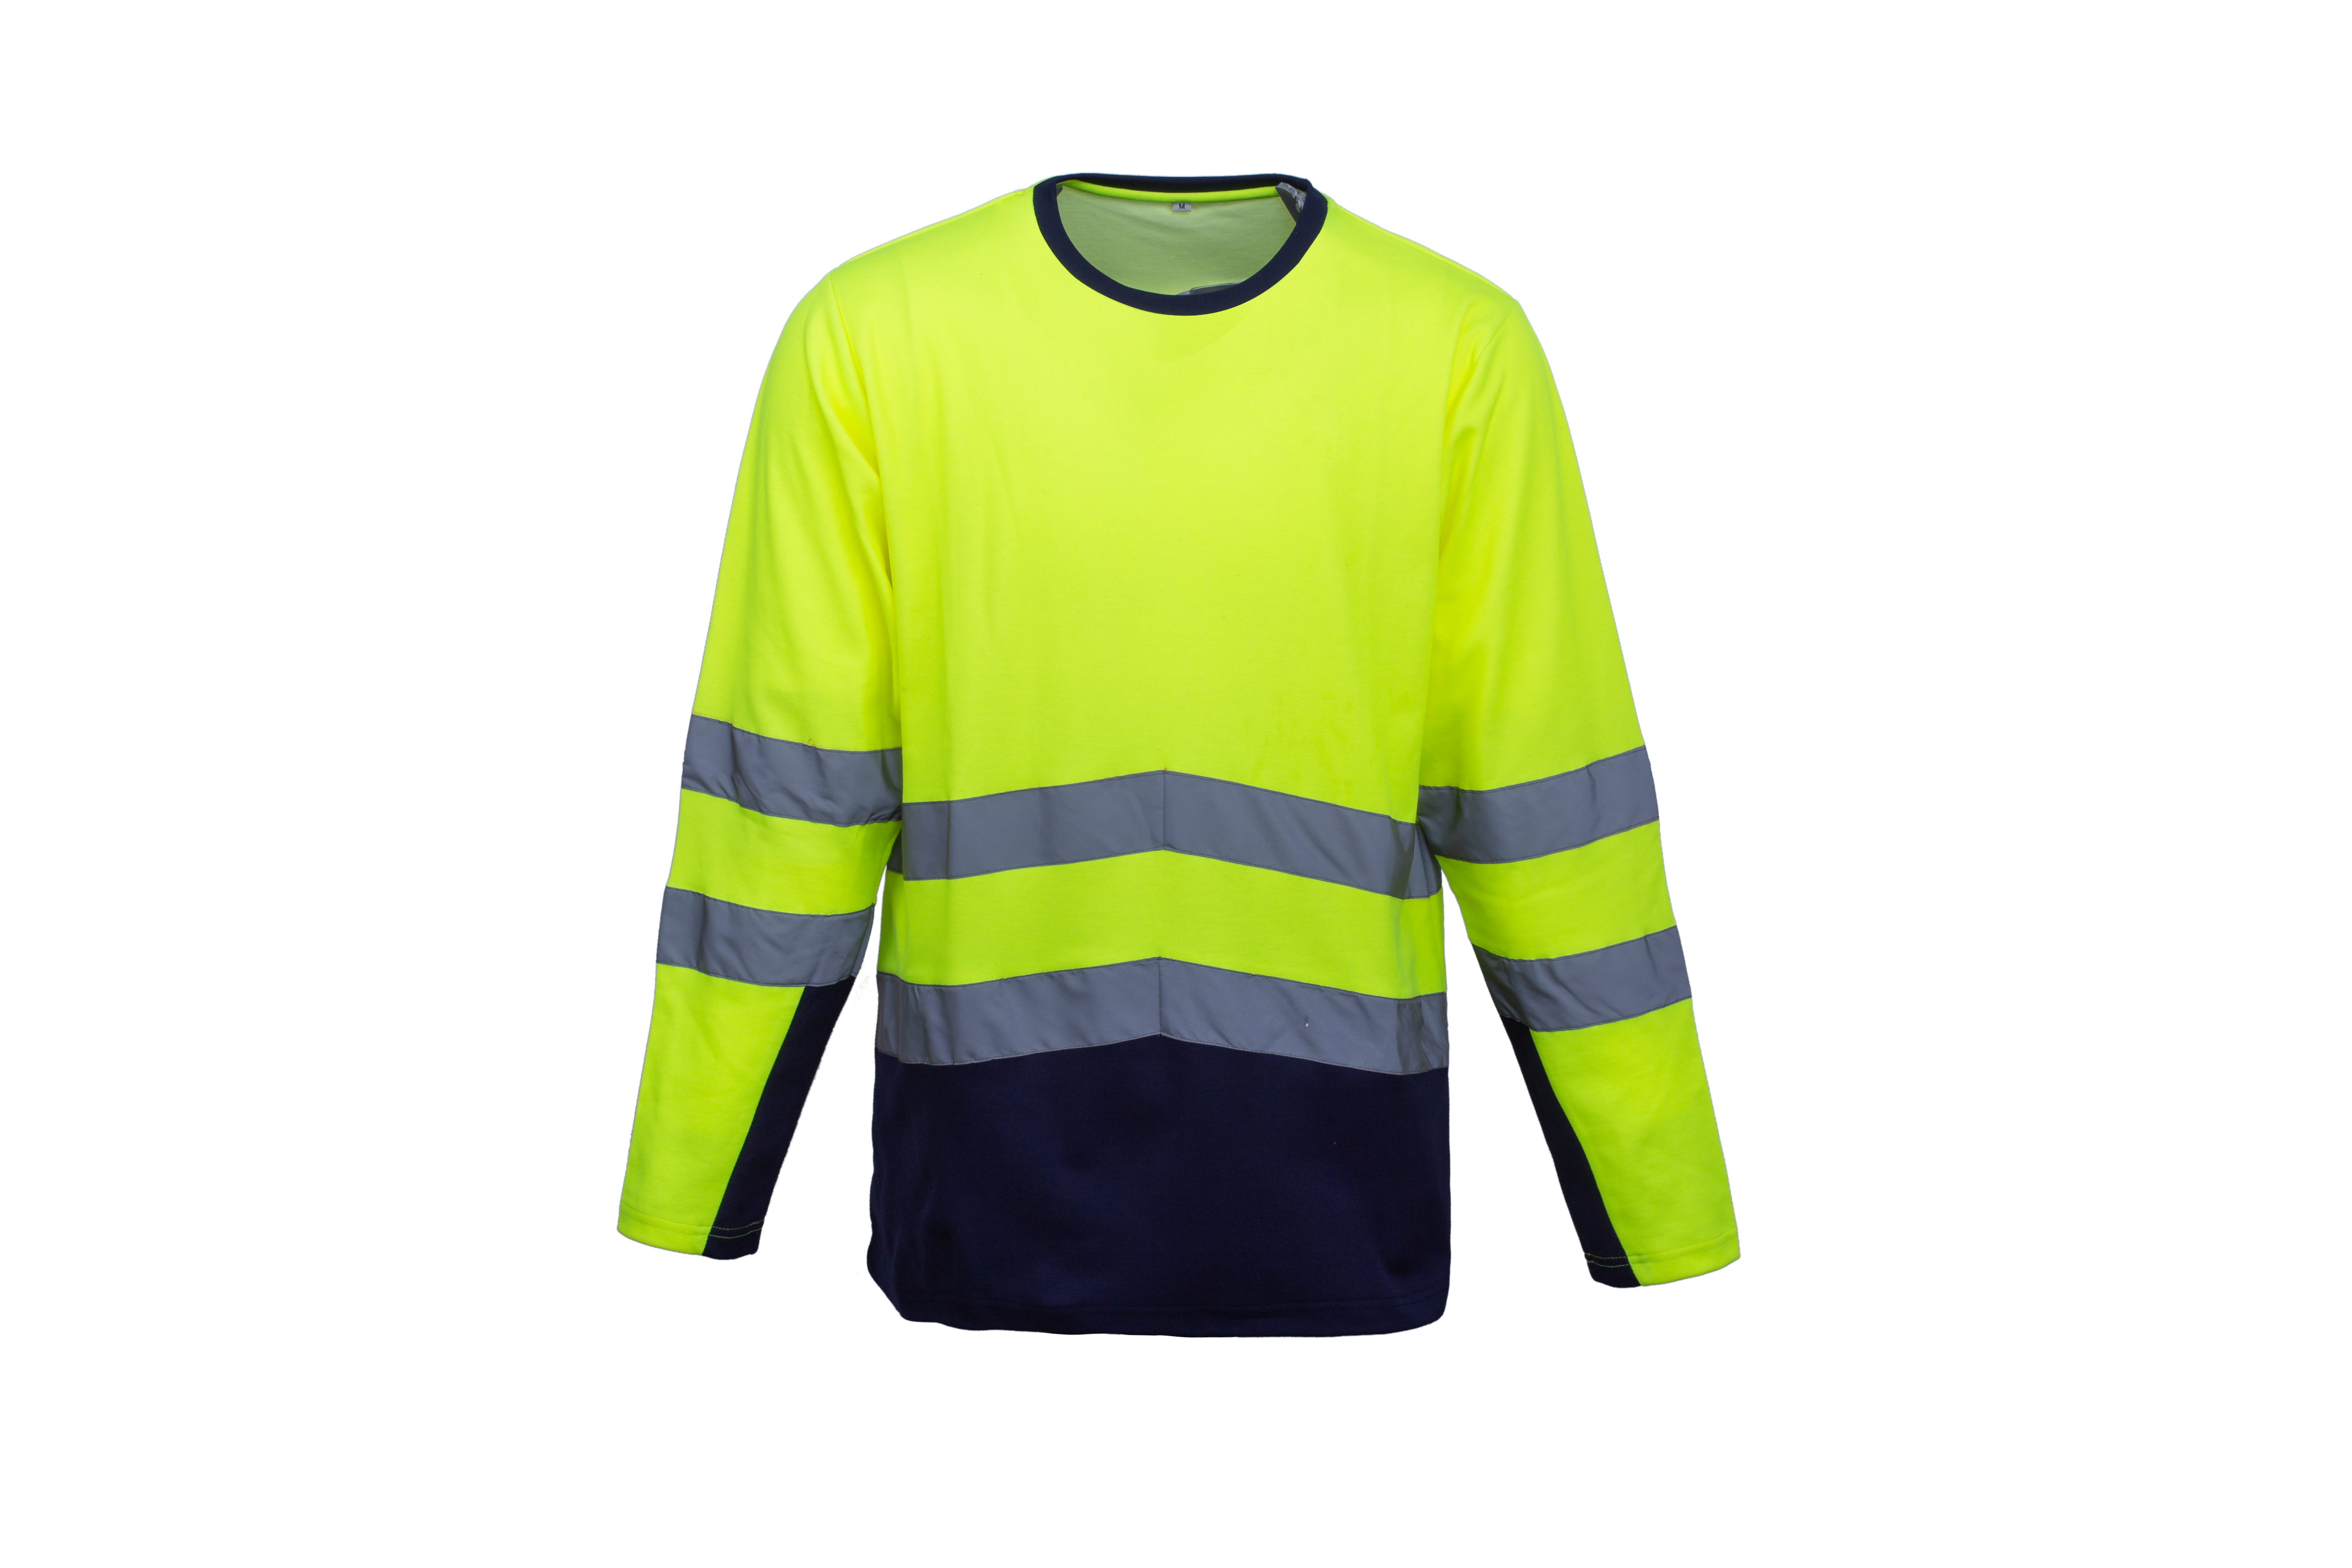 The Police Traffic Operations Reflective Polo